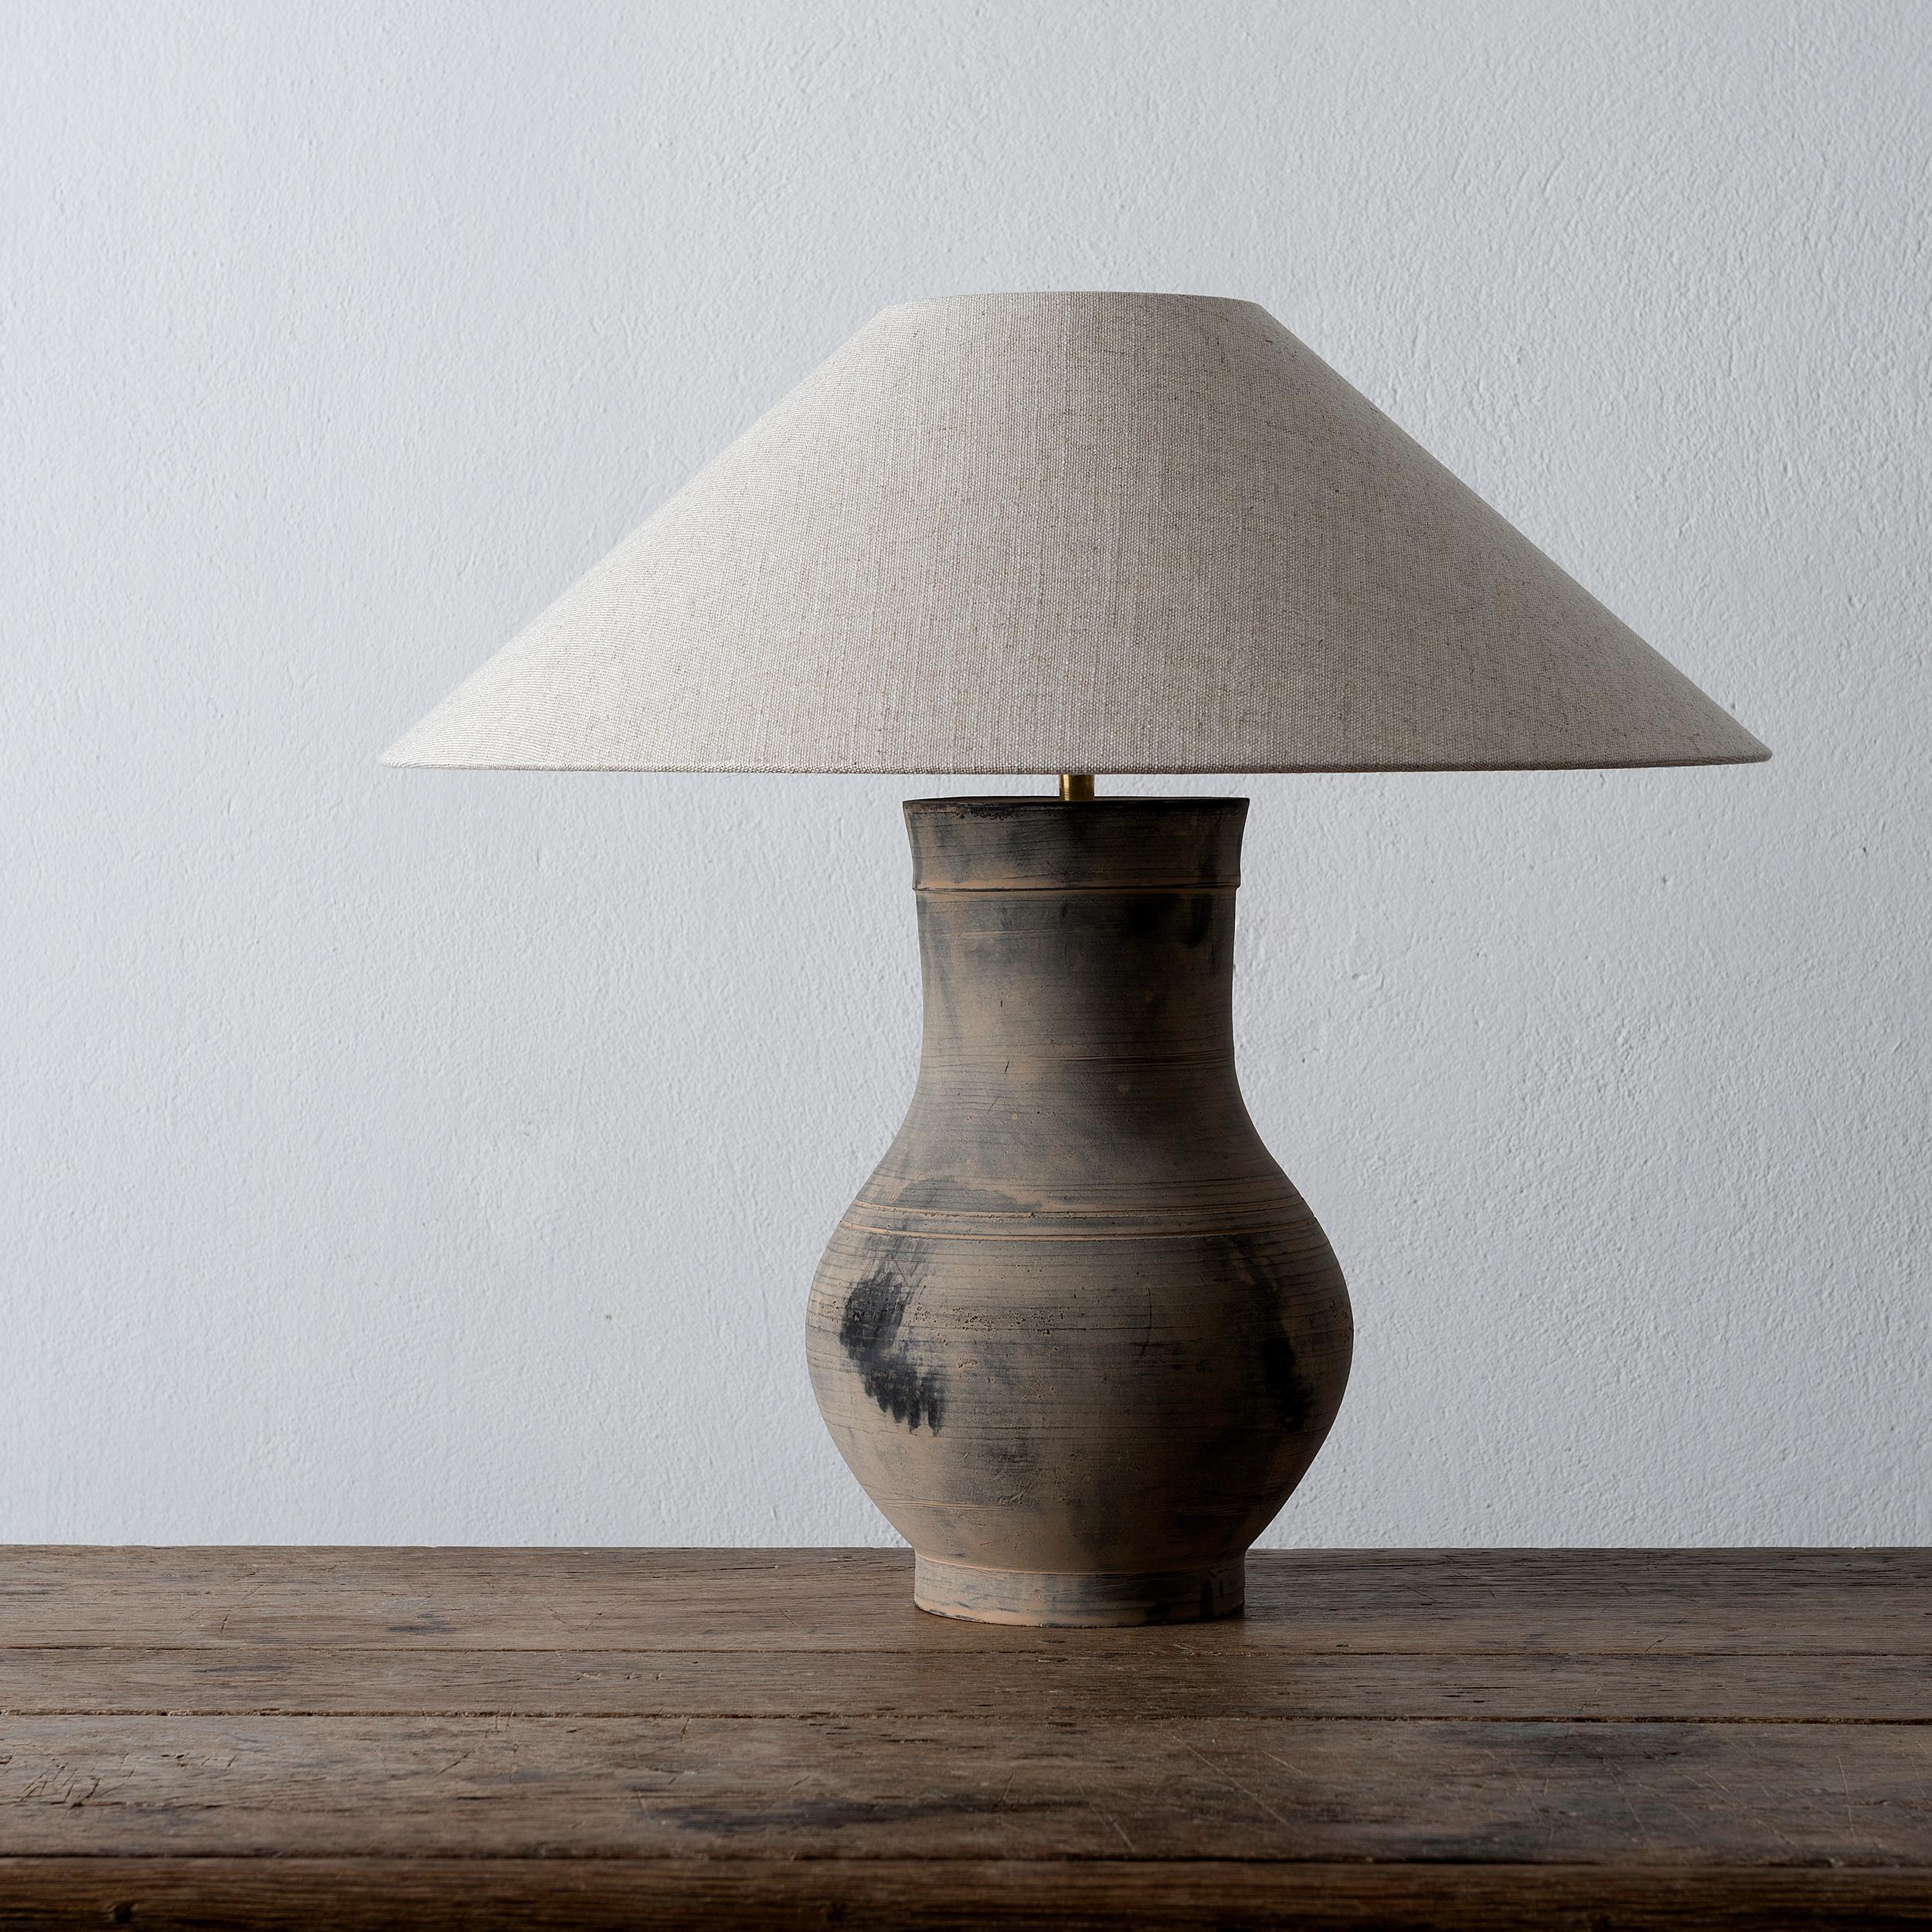 Contemporary Near Pair of Chinese Han Lamps with Handmade Belgian Linen Shades